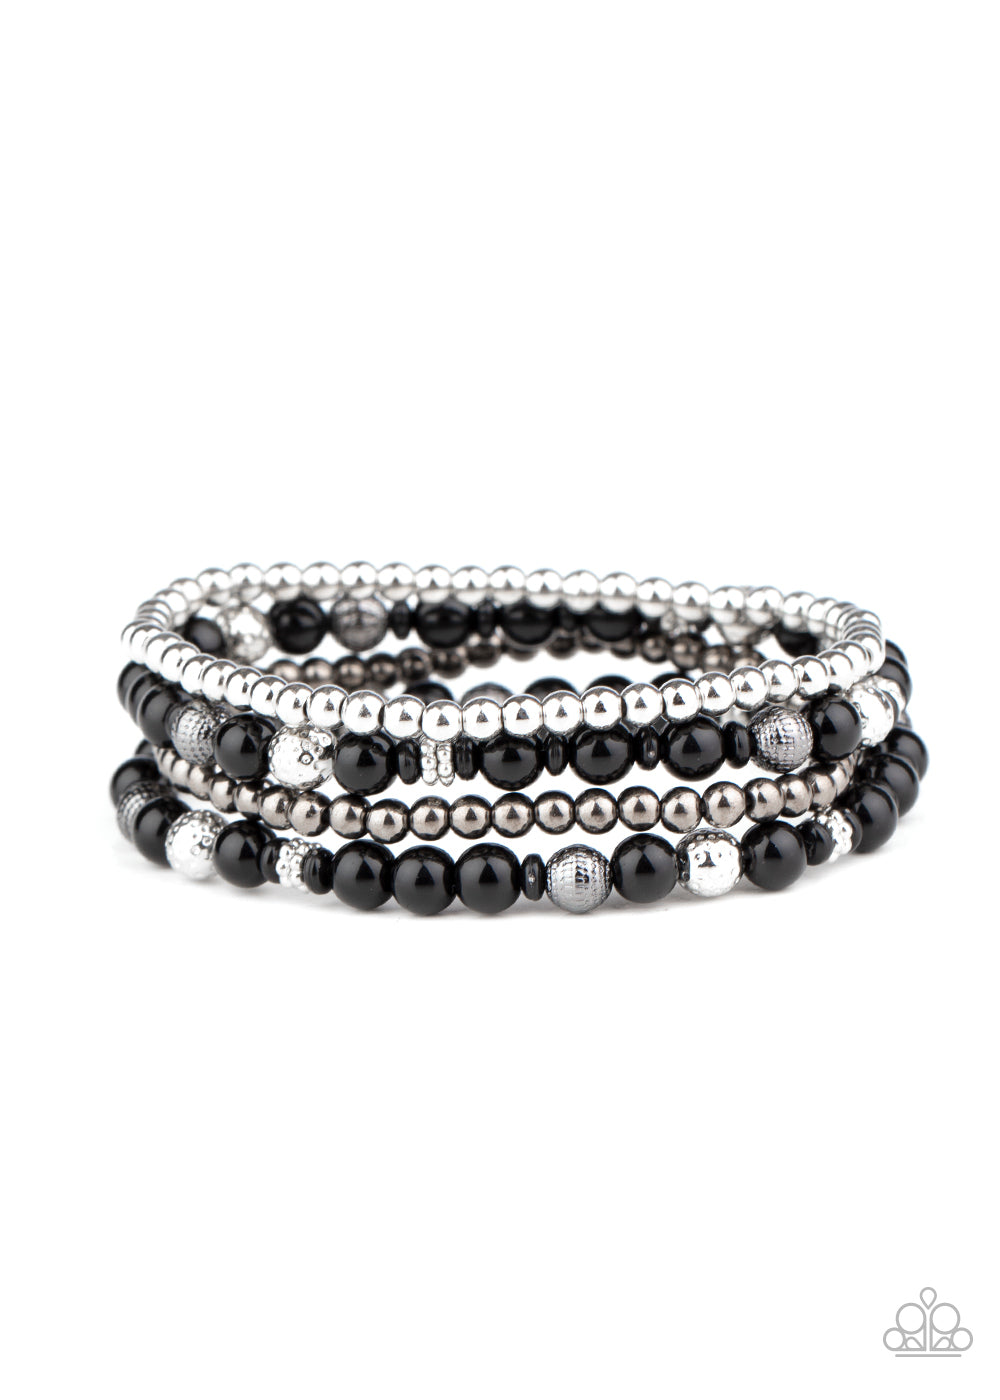 Stacked Style Maker Black Bracelet - Paparazzi Accessories